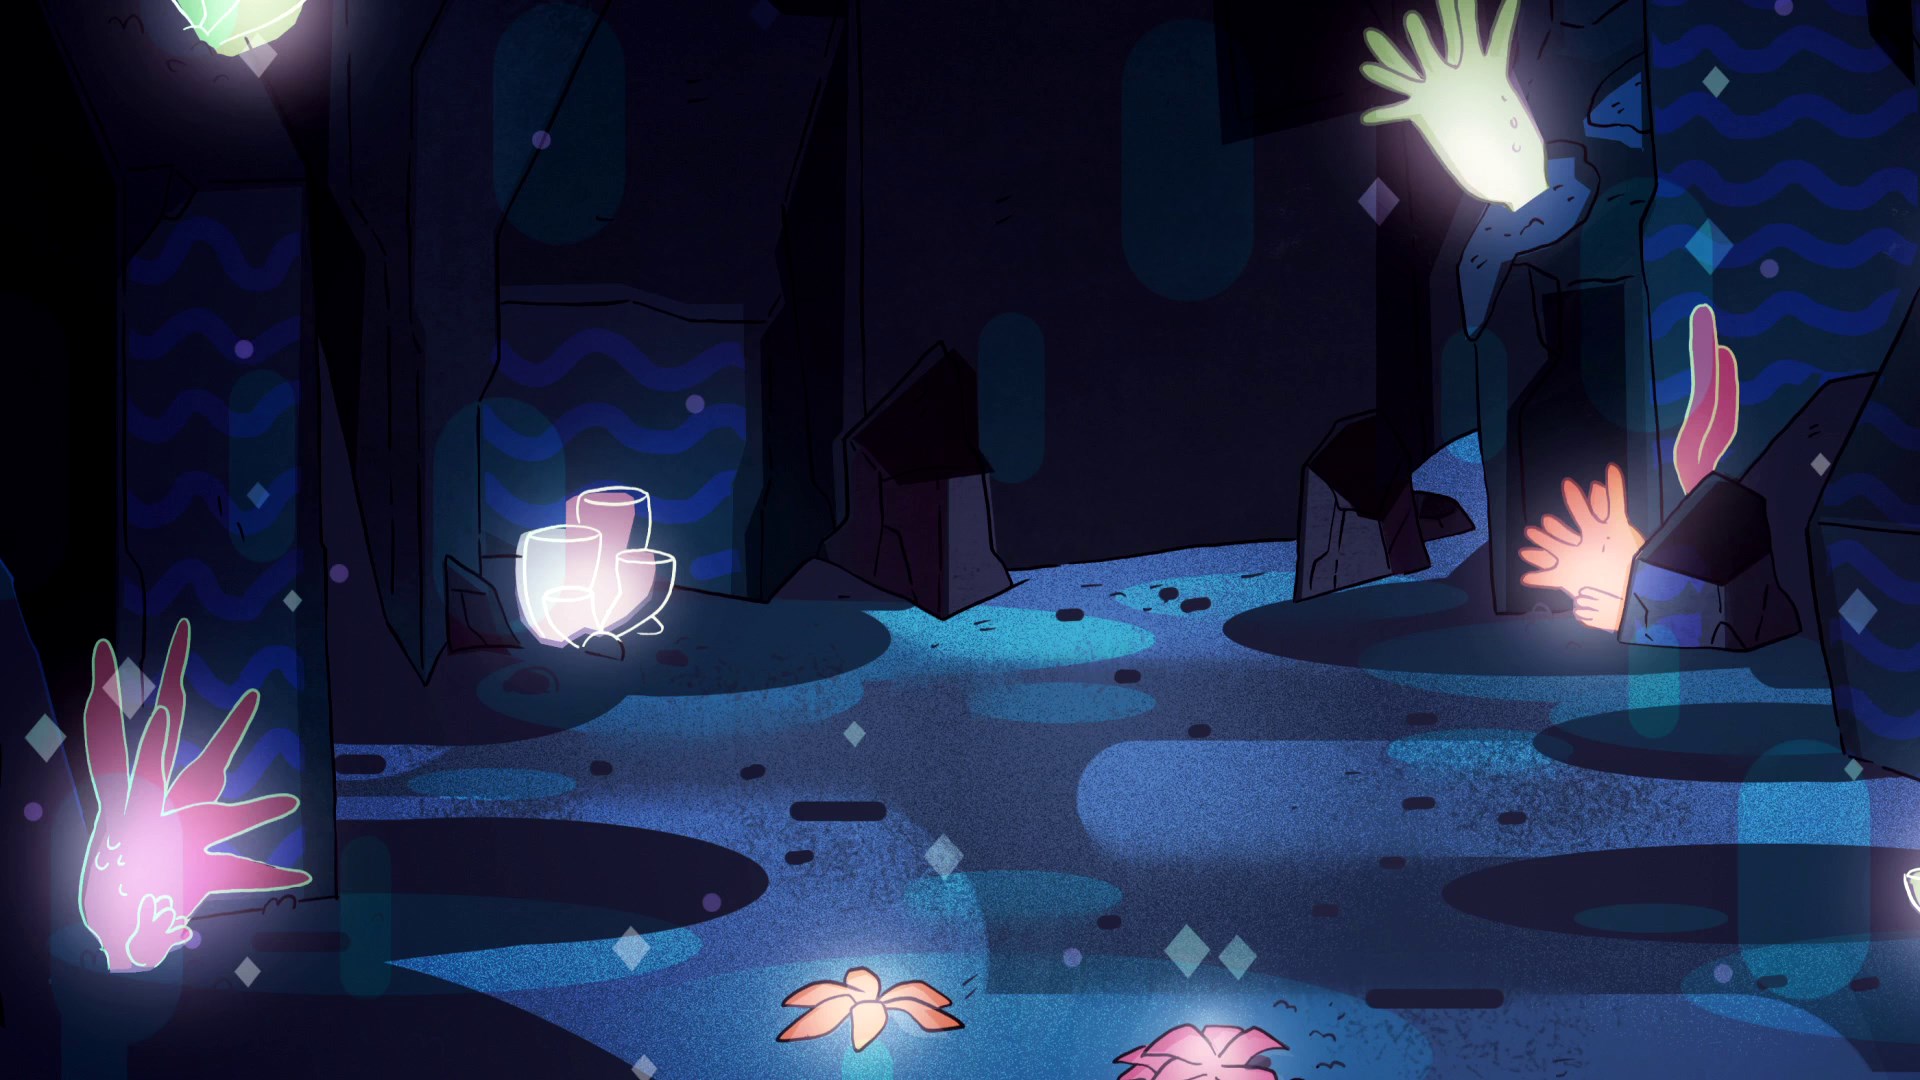 A cave with a large crystal in the center, surrounded by smaller crystals. - Steven Universe